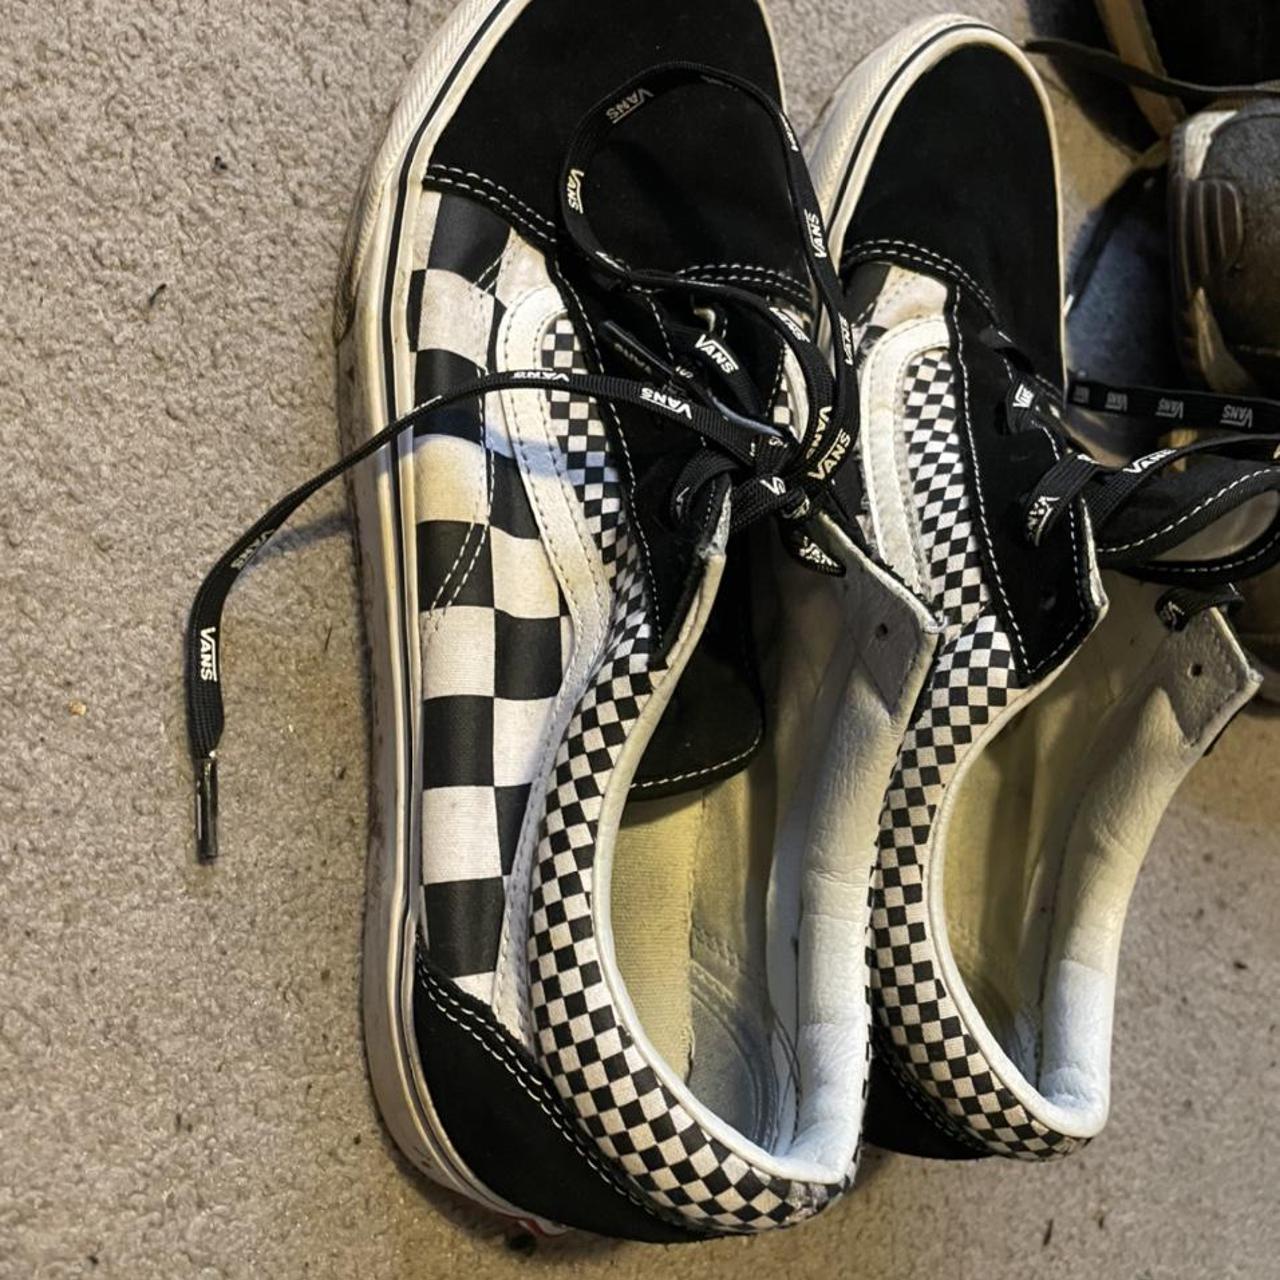 Vans Men's Black and White Trainers (2)